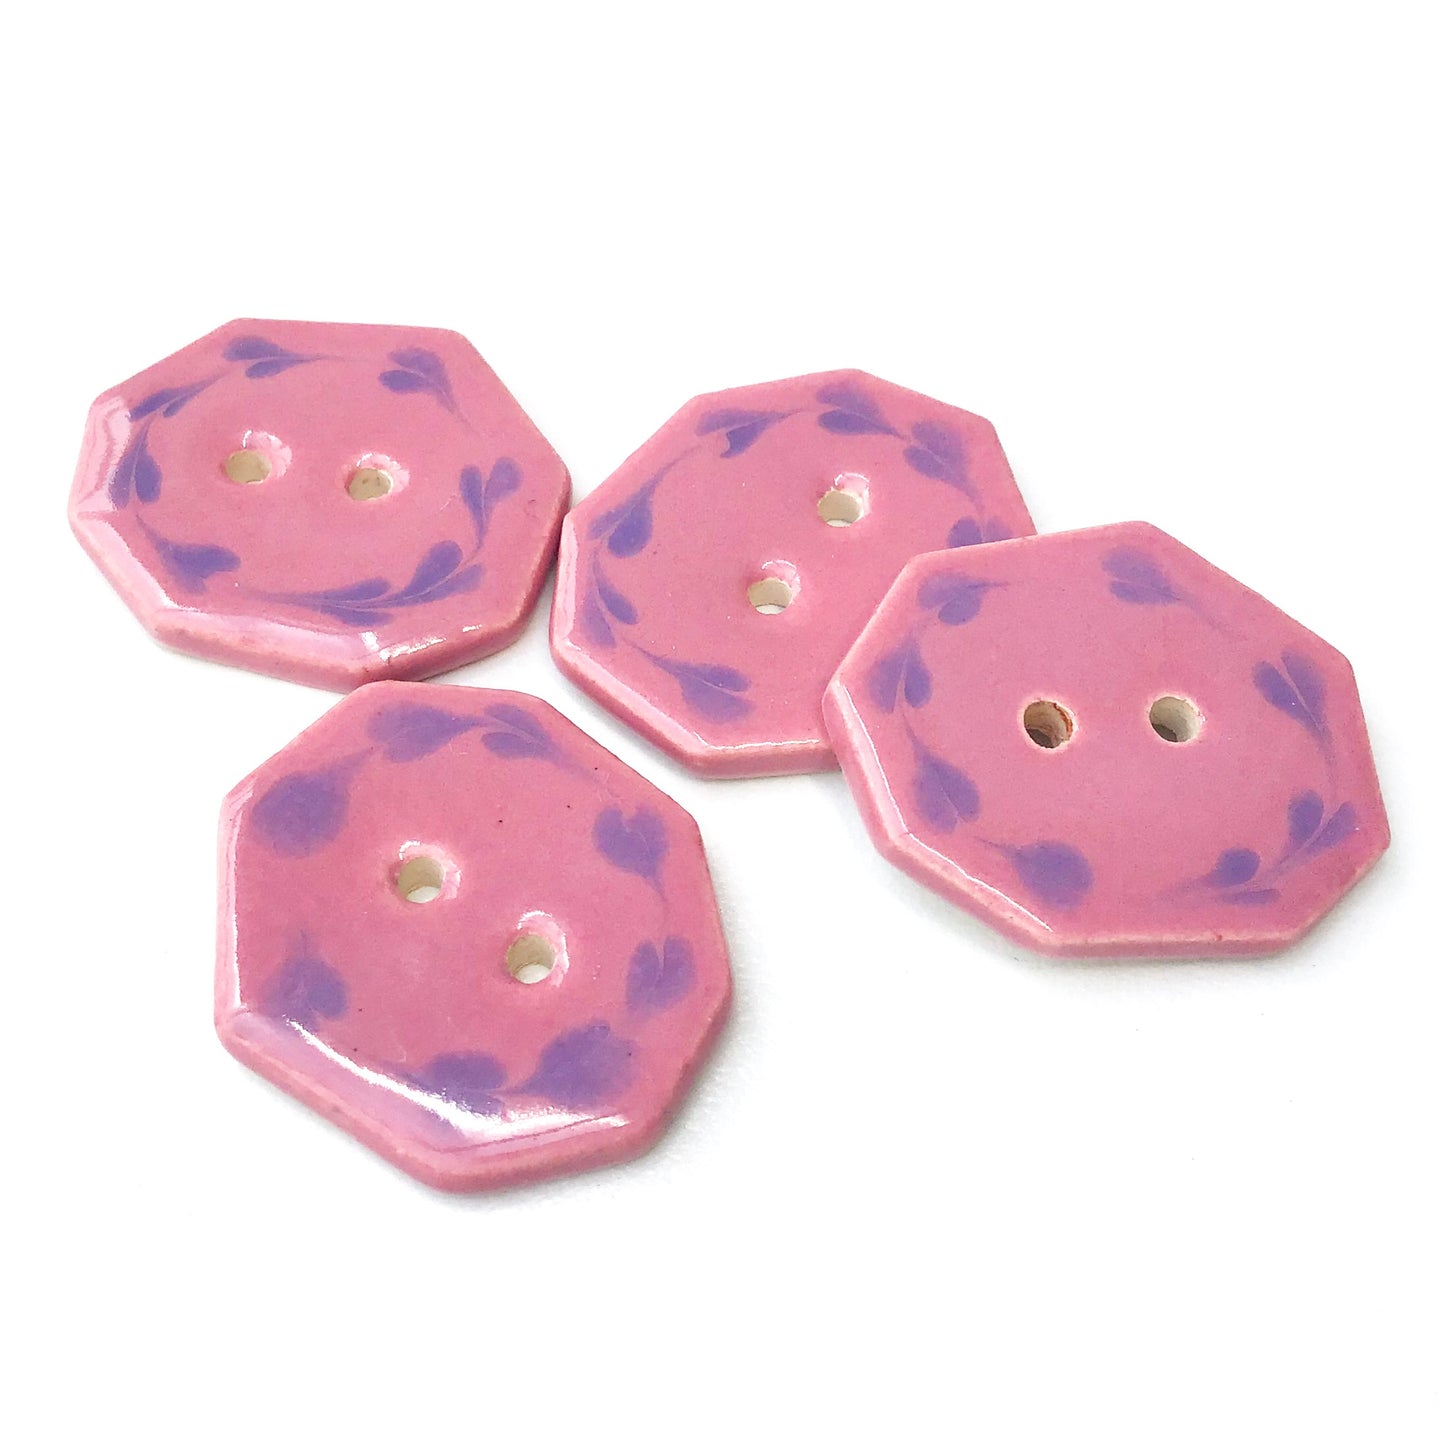 Geometric Buttons - Mauve and Purple Buttons - 3/4 x 1"- 4 Pack